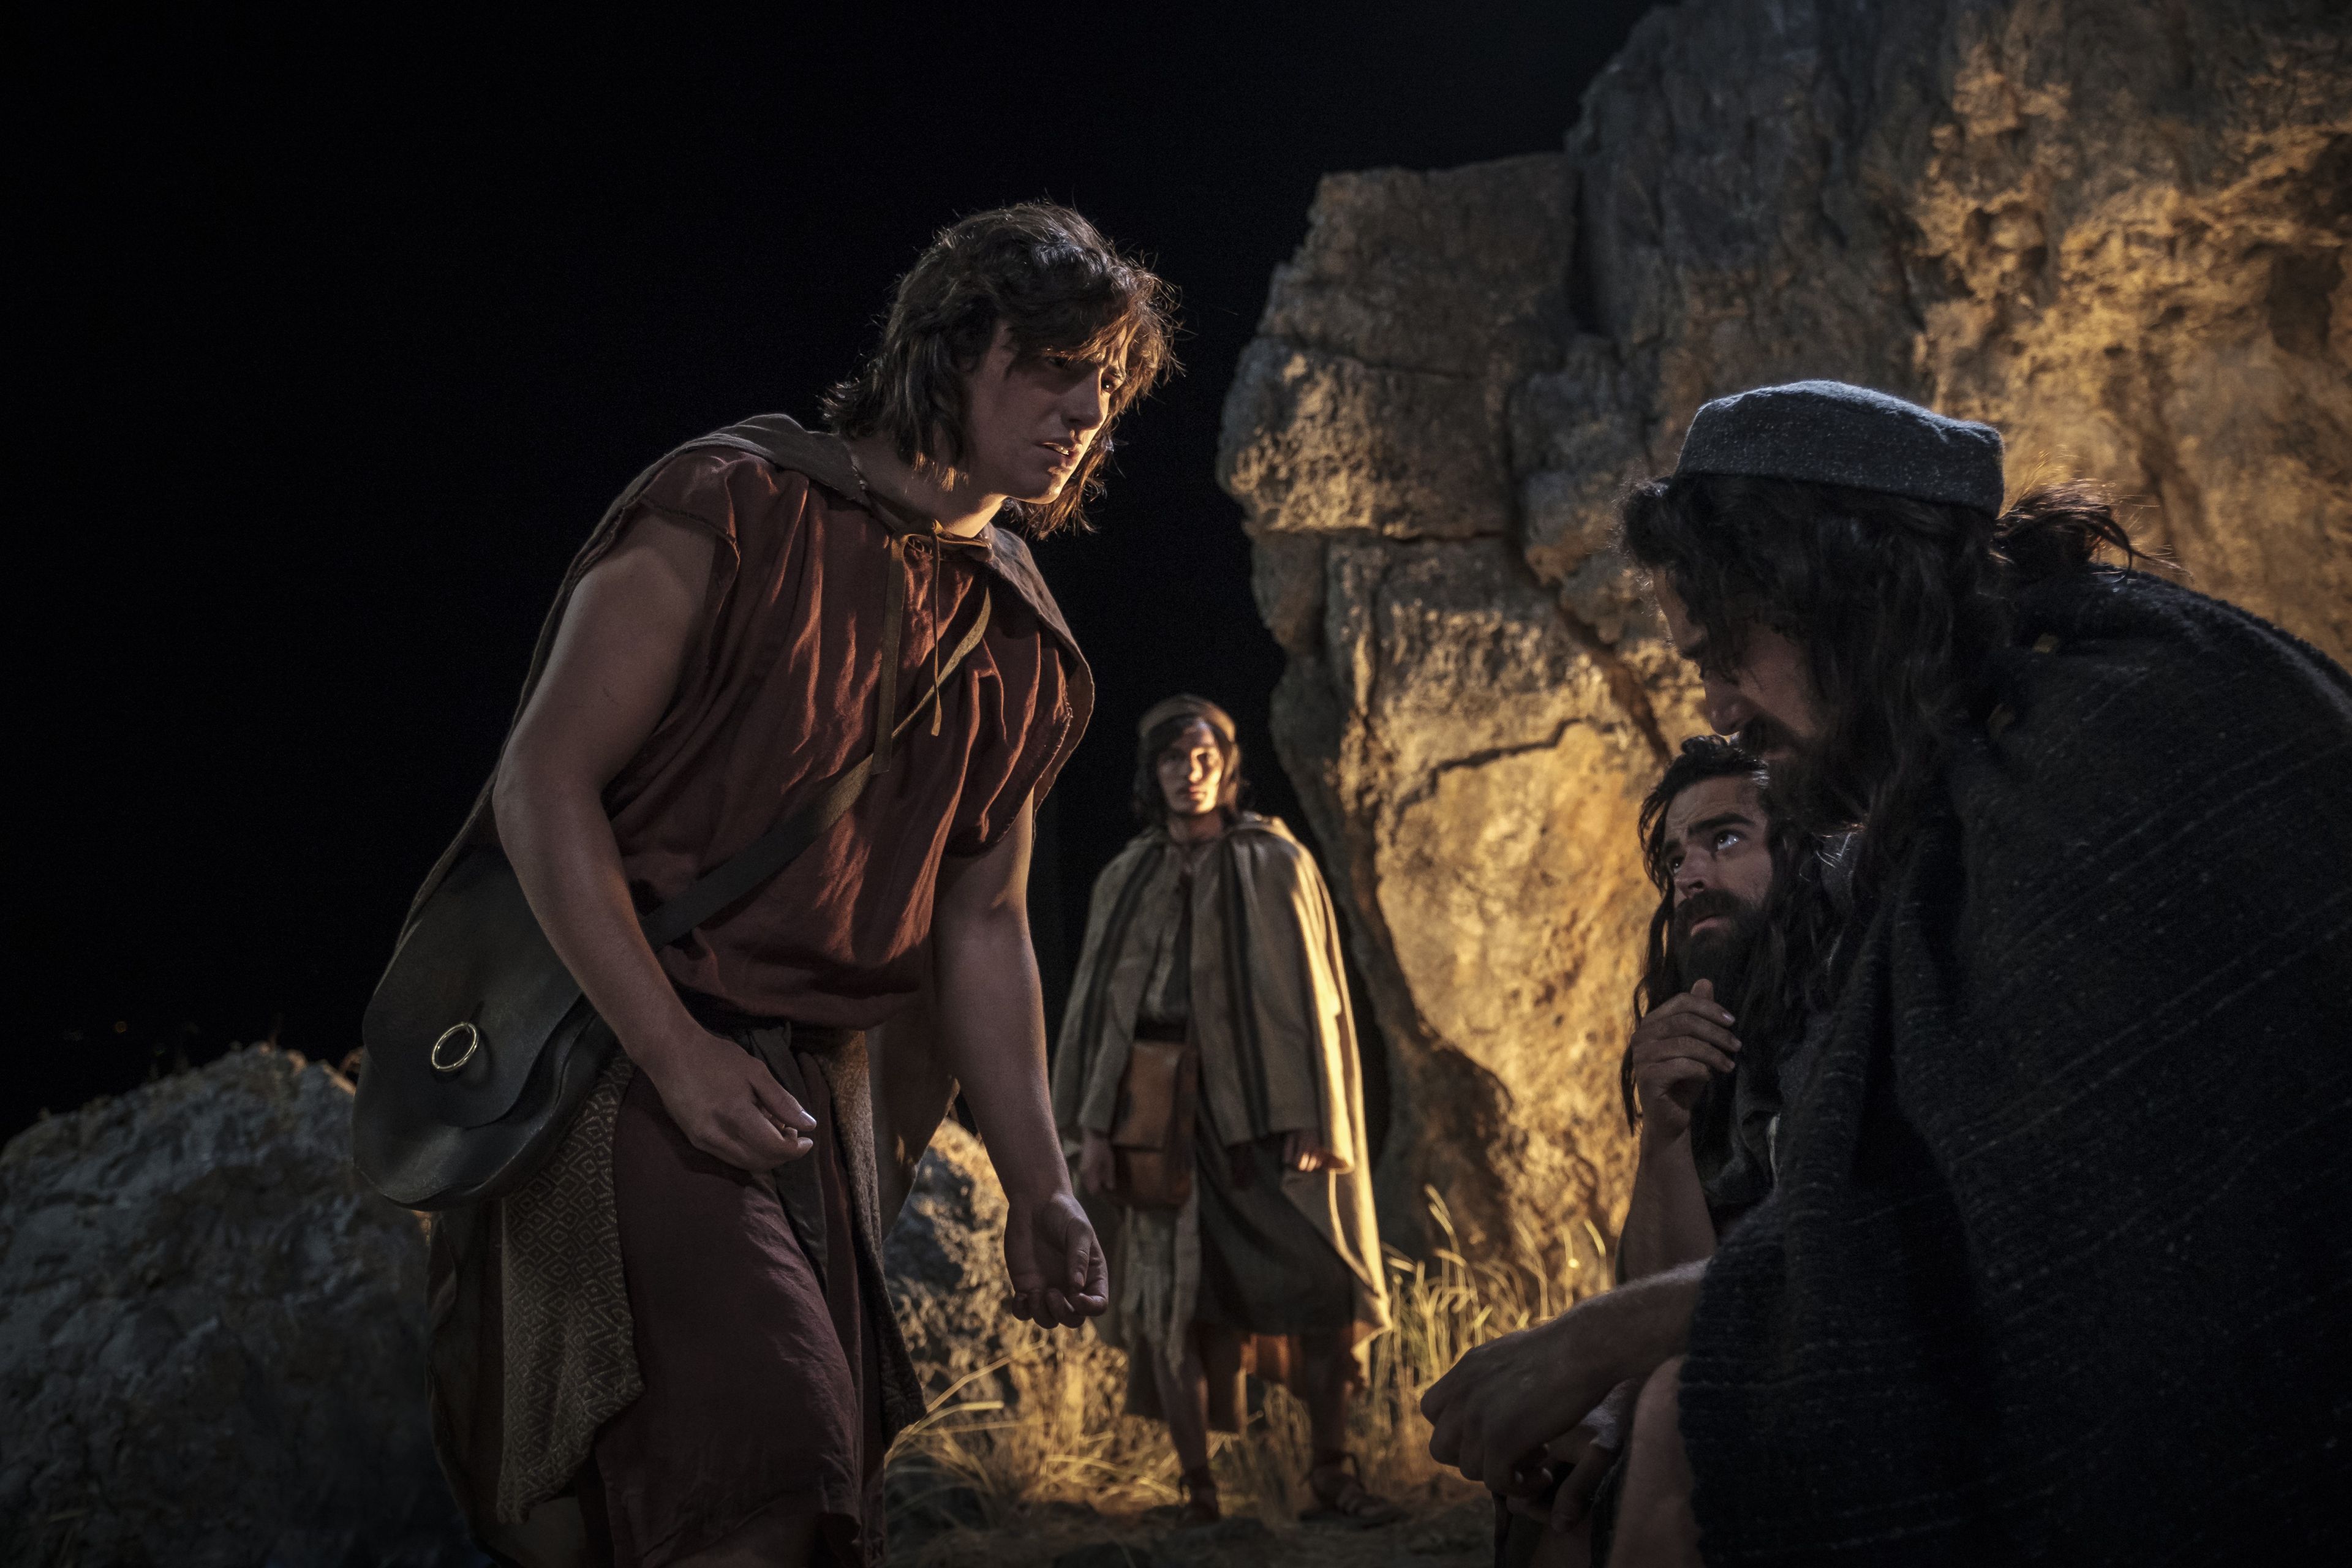 Nephi and his brothers discuss returning to Laban.